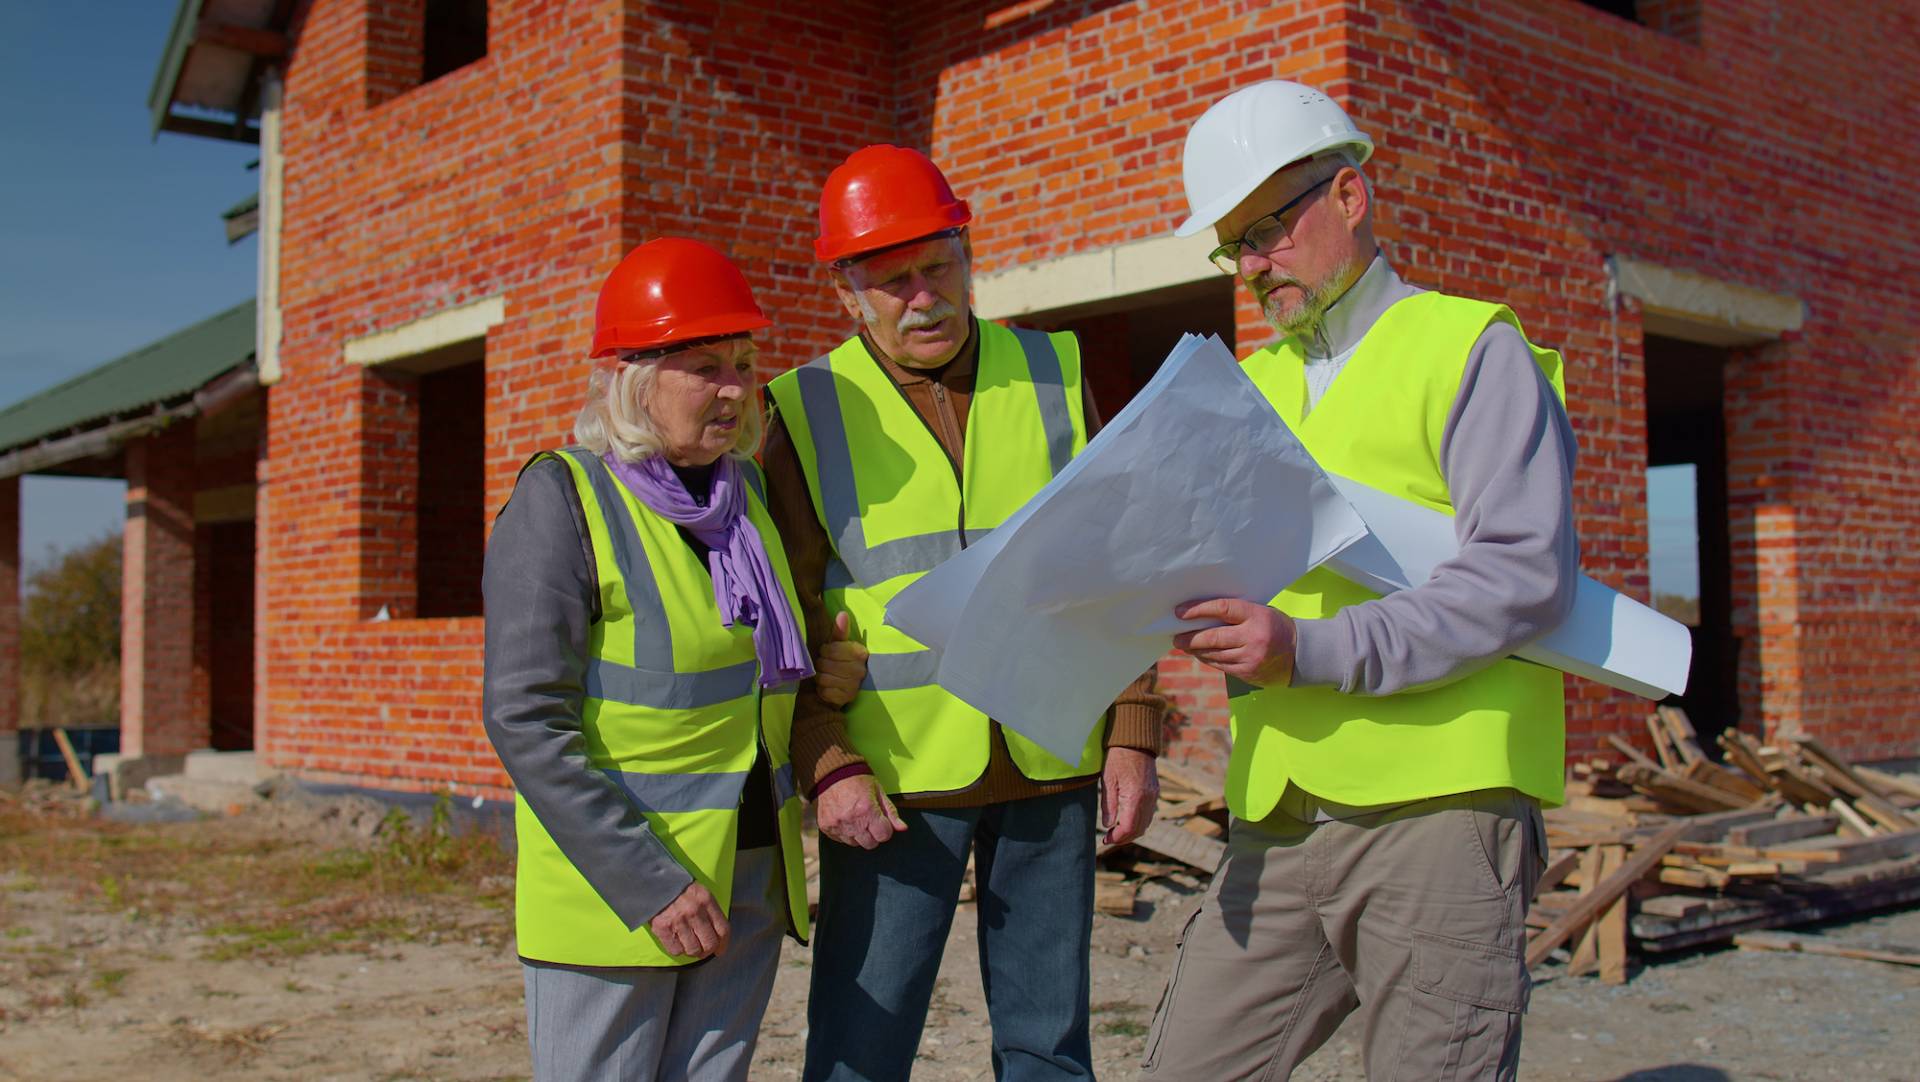 Construction workers in front of a brick building